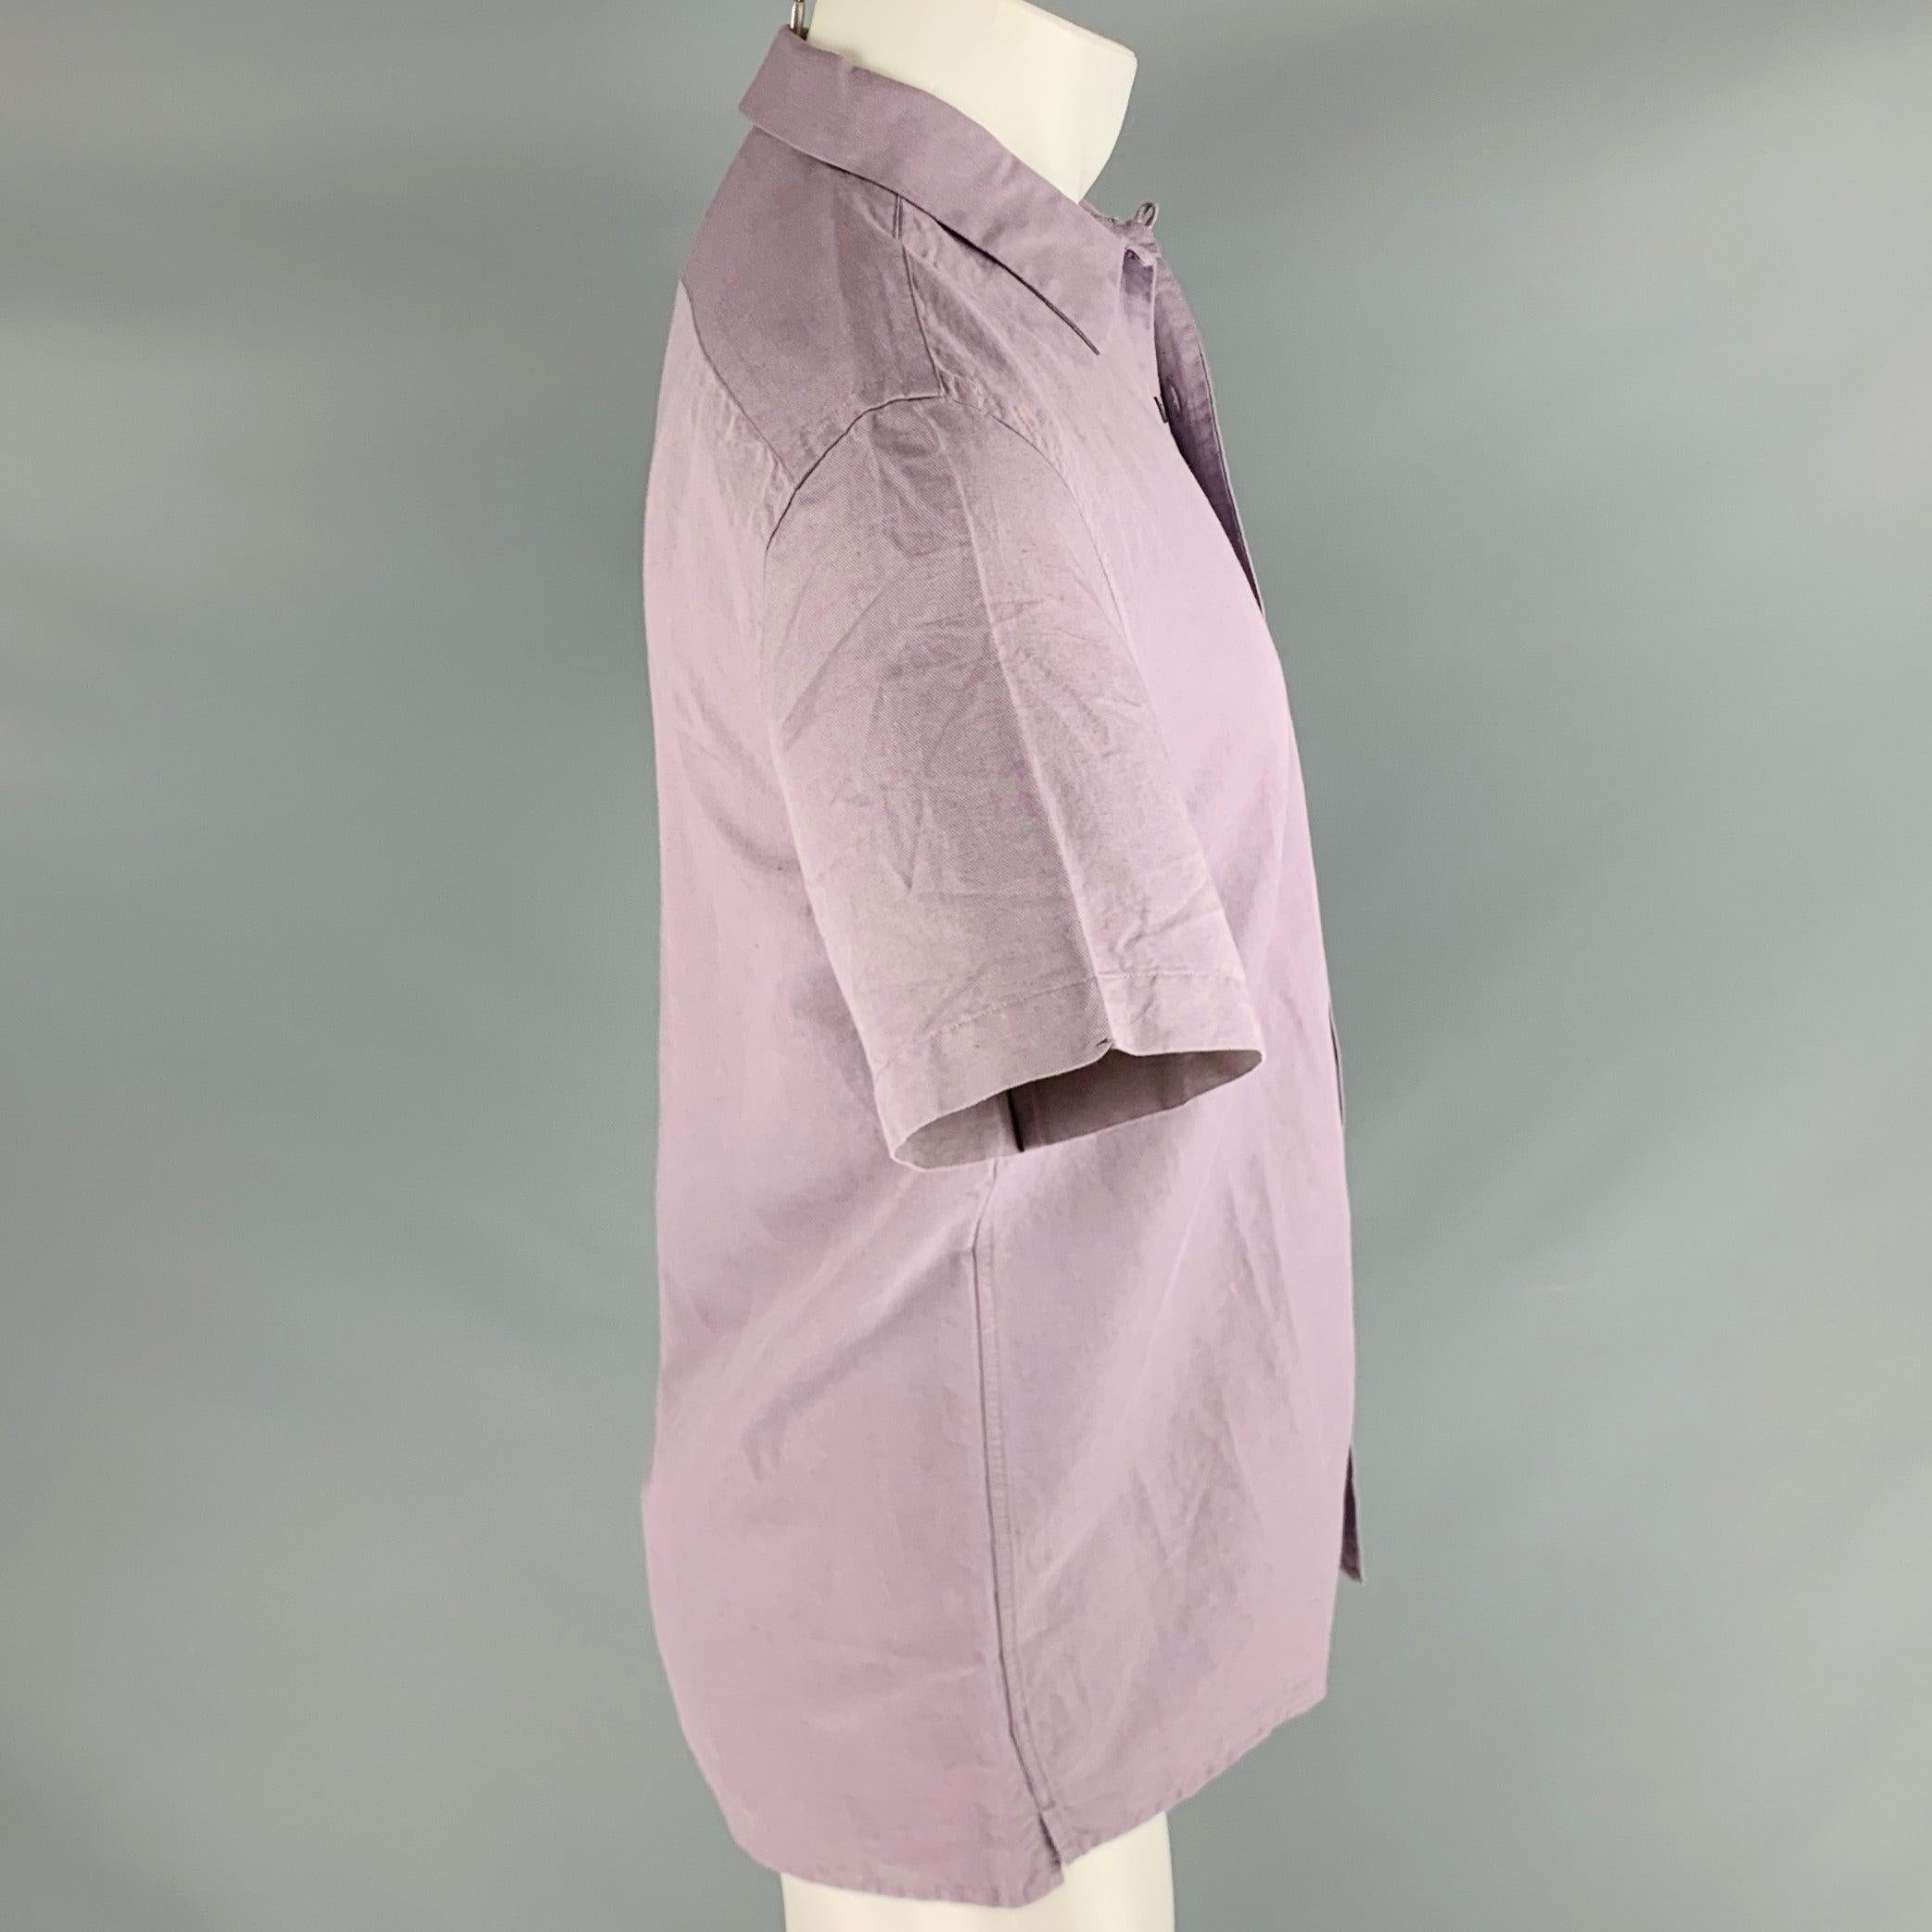 PS by PAUL SMITH short sleeve shirt
in a
purple linen cotton blend fabric featuring a camp style, casual fit, and button closure.New with Tags. 

Marked:   S 

Measurements: 
 
Shoulder: 16.5 inches Chest: 39 inches Sleeve: 9 inches Length: 29